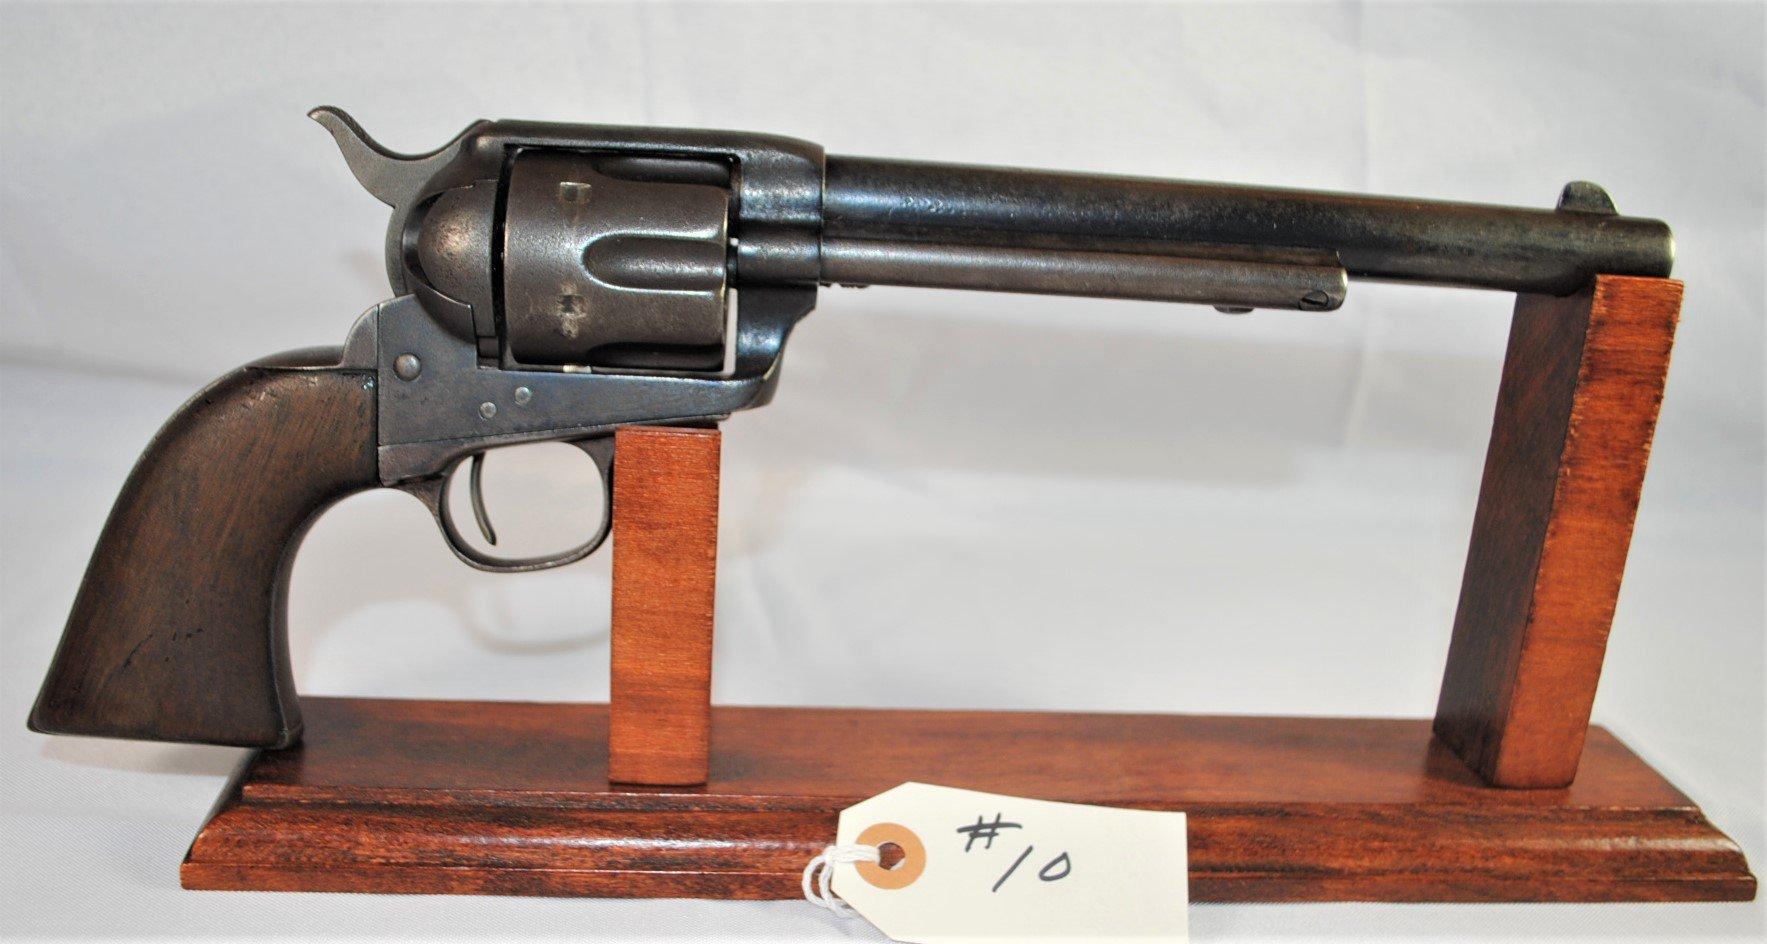 COLT SINGLE ACTION ARMY SERIAL NUMBER 85745